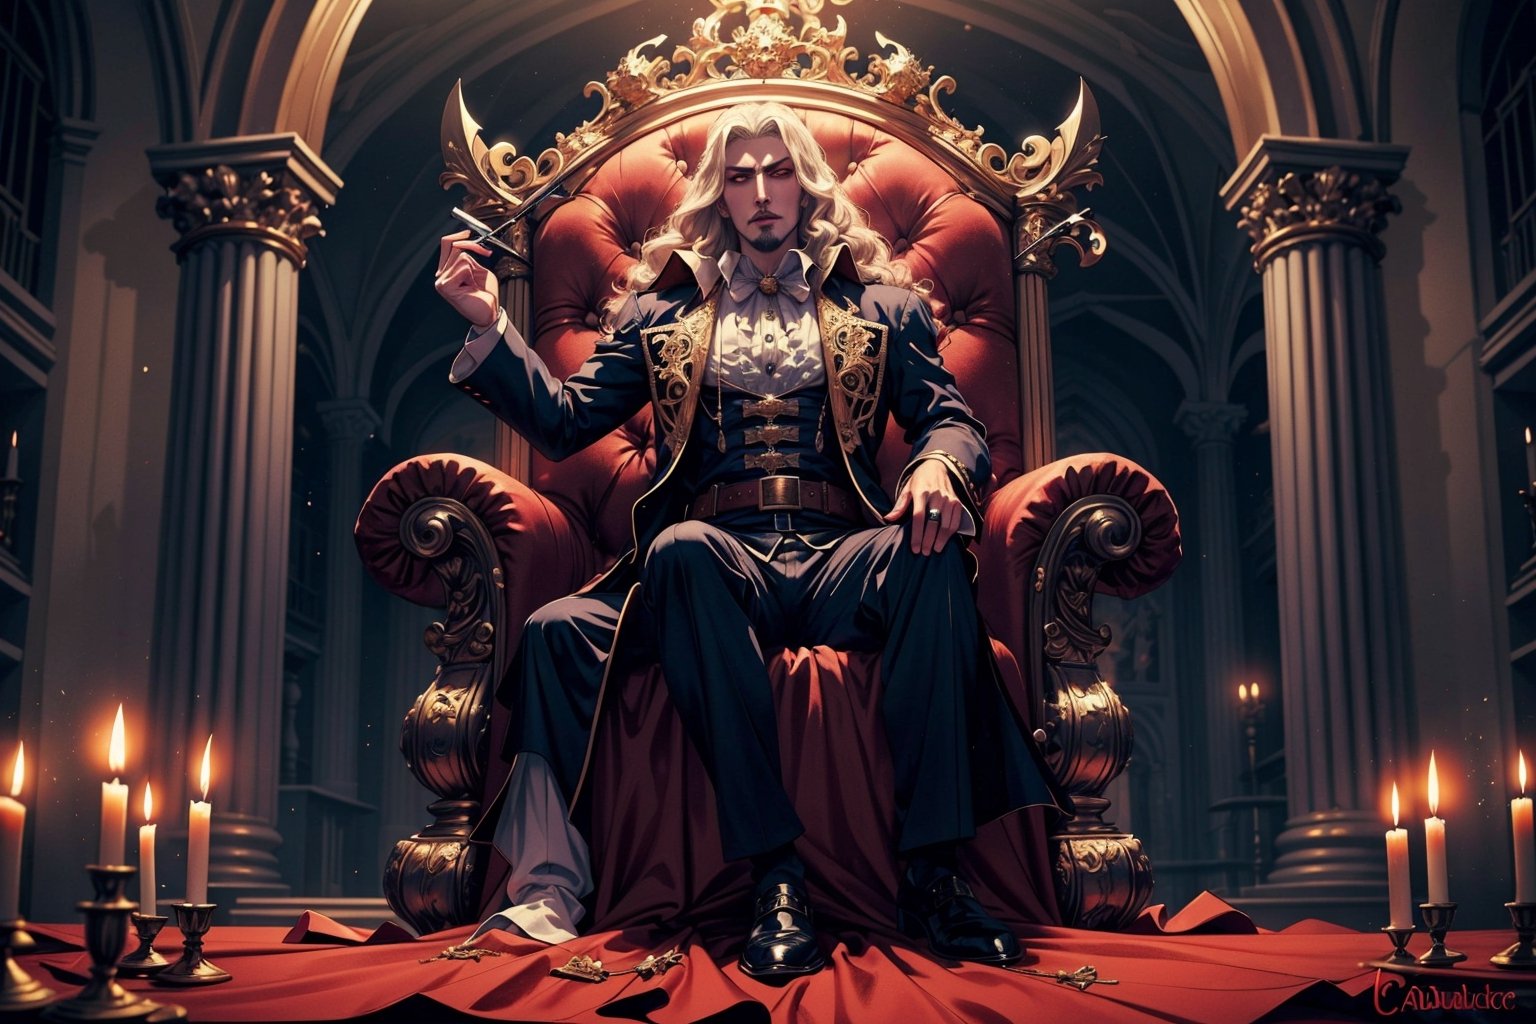 masterpiece,best quality,ultra-detailed,High detailed,picture-perfect face,man,manly,black hair,confident,arrogant,long hair,curly hair,red glowing eyes,fangs,dracula,castlevania,konami,infront of gothic castle,red and black vamiper attire,ornate and intricate,gold trim,belt,epic pose,fantasy,town,draculacastlevania
on his gothic throne,alucardcastlevania,DonMDj1nnM4g1cXL 